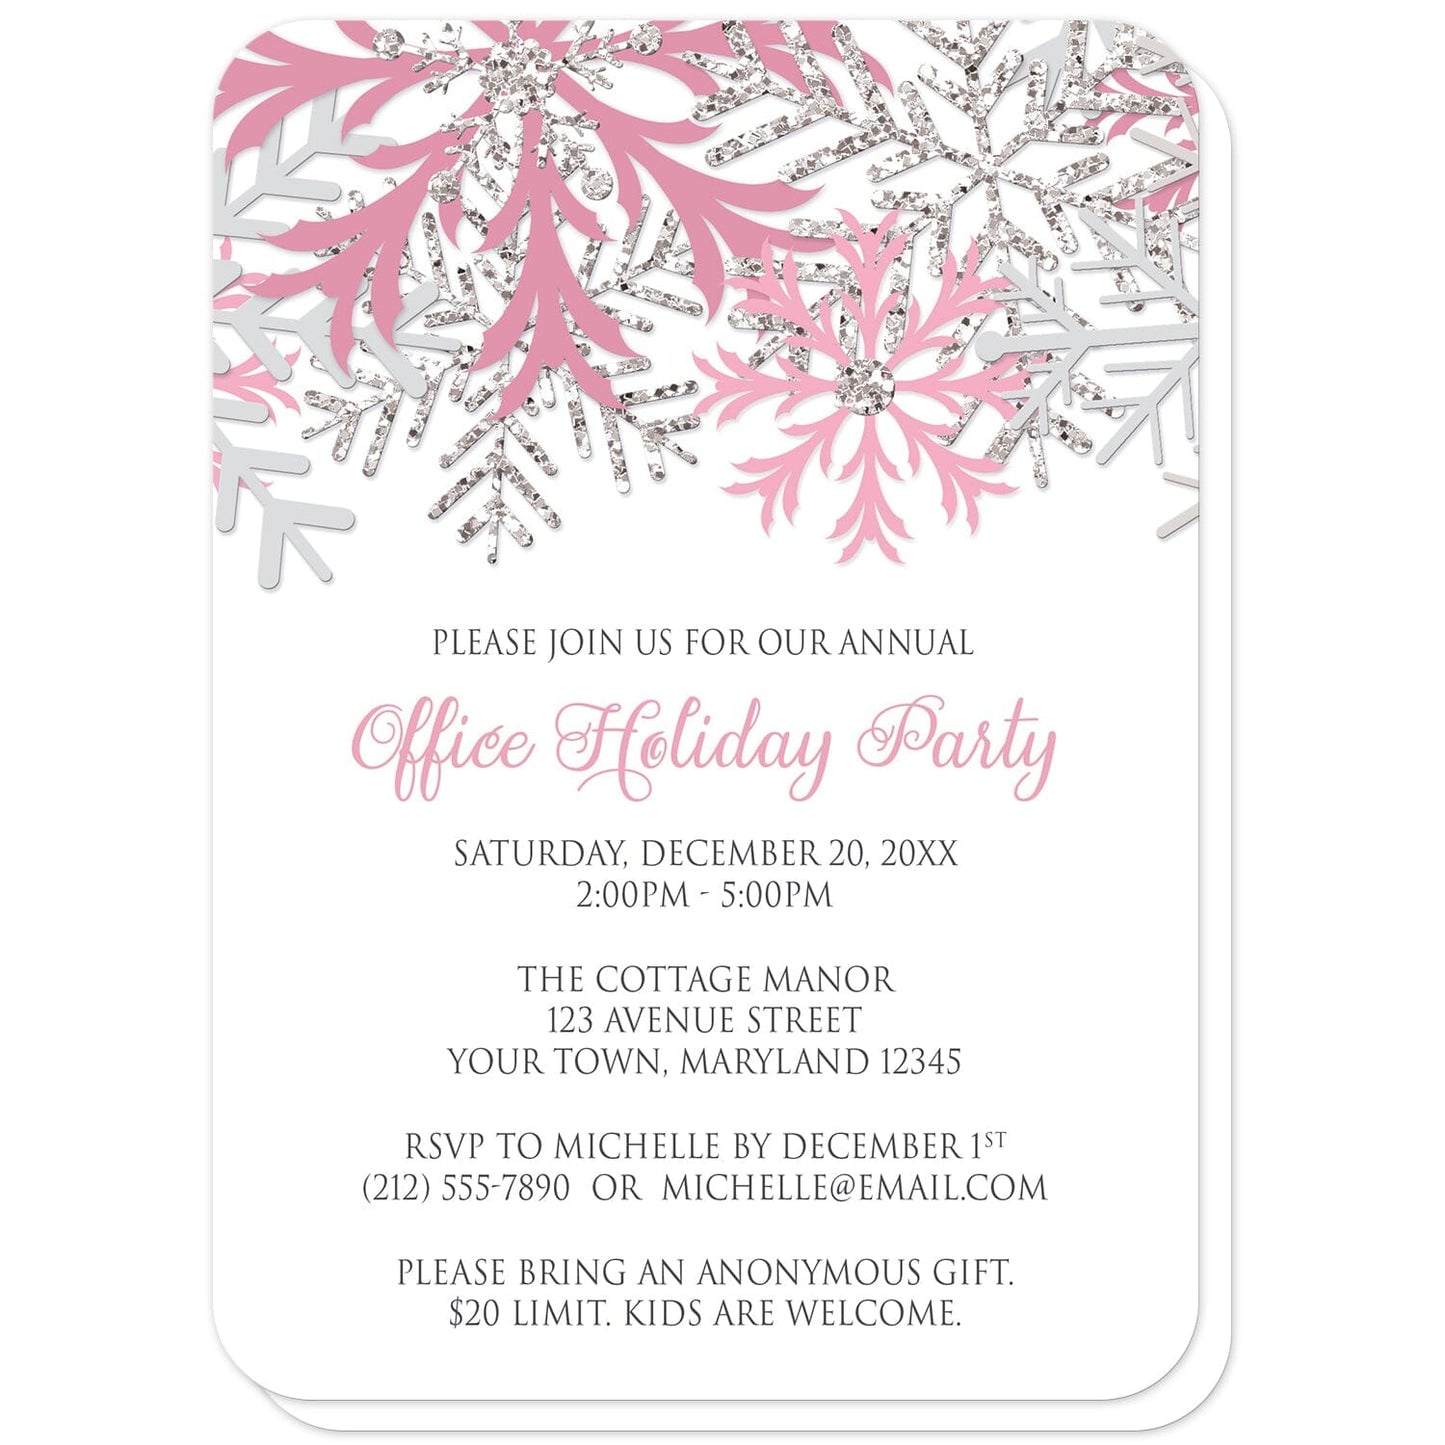 Winter Pink Silver Snowflake Holiday Party Invitations (with rounded corners) at Artistically Invited. Winter pink silver snowflake holiday party invitations with pink, light pink, and silver-colored glitter-illustrated snowflakes over a white background. Your personalized party details for your home or office party are custom printed in gray and pink. The occasion title is printed in a whimsical pink script font while your remaining details are printed in an all-capital letters gray serif font.